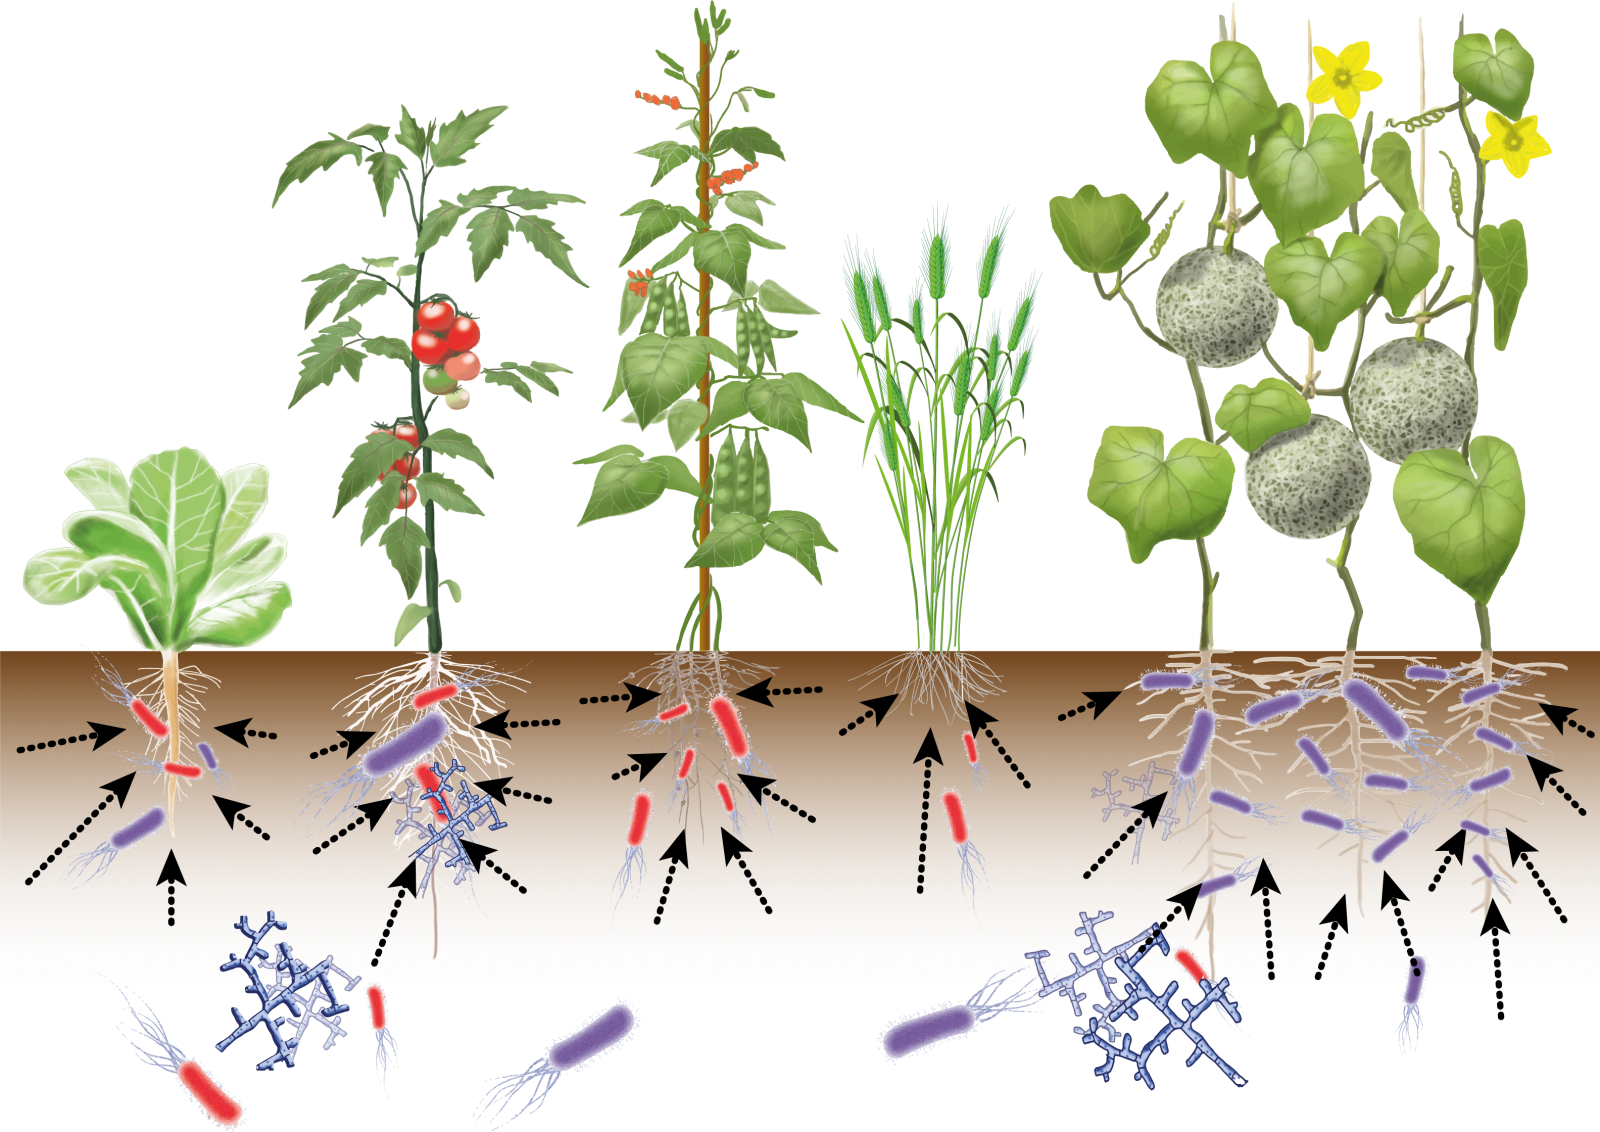 Different model plants and their interaction with soil microbes, schematic